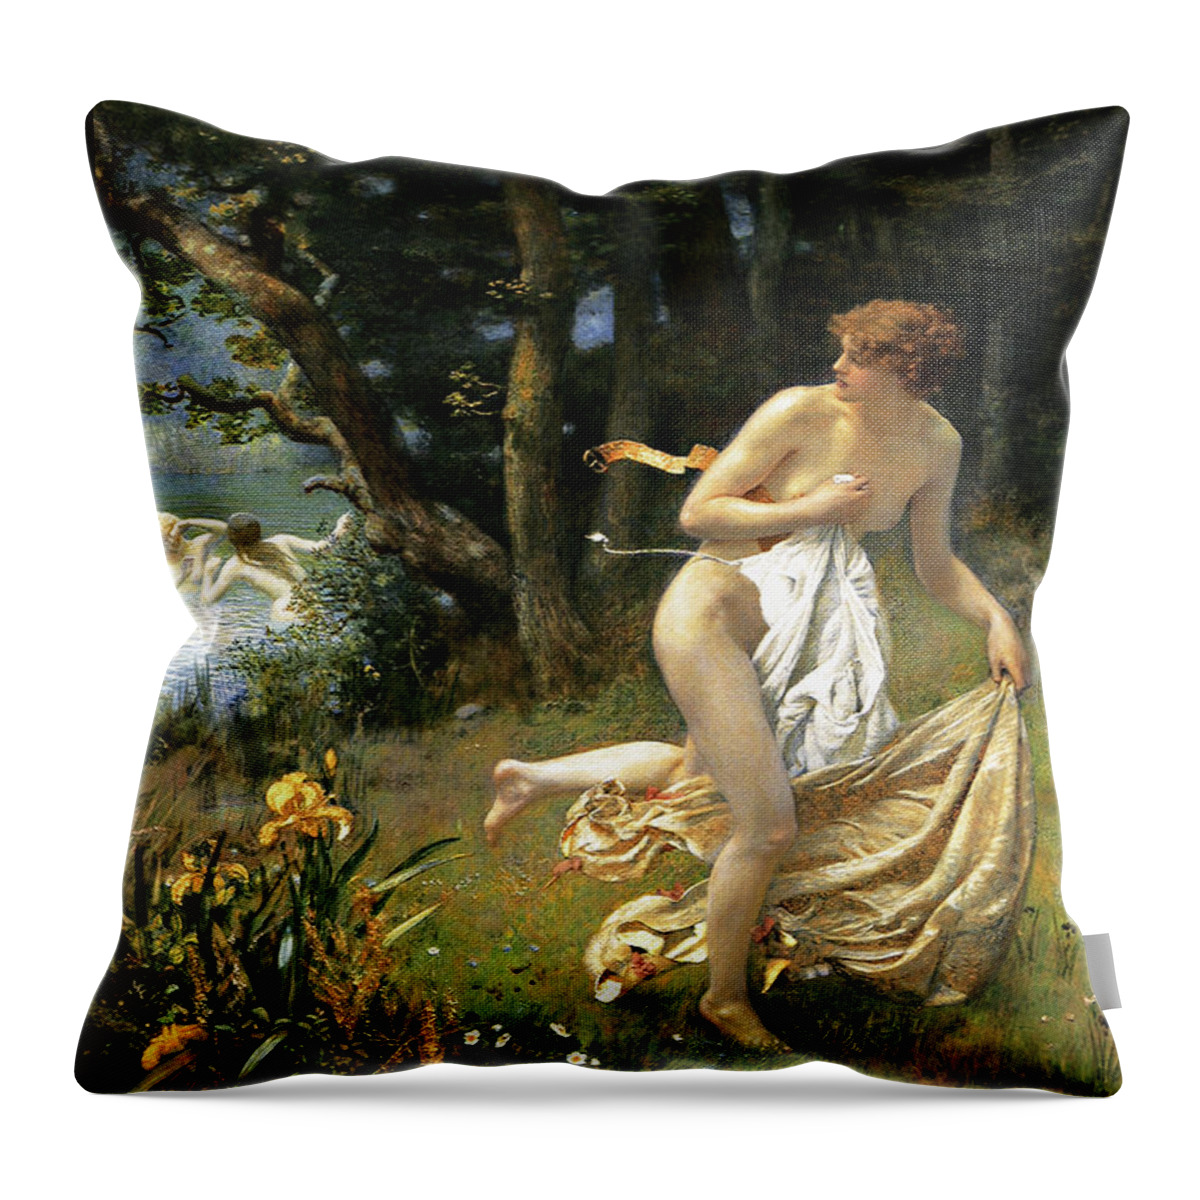 Diana's Maidens Throw Pillow featuring the painting Dianas Maidens by Edward Robert Hughes by Rolando Burbon